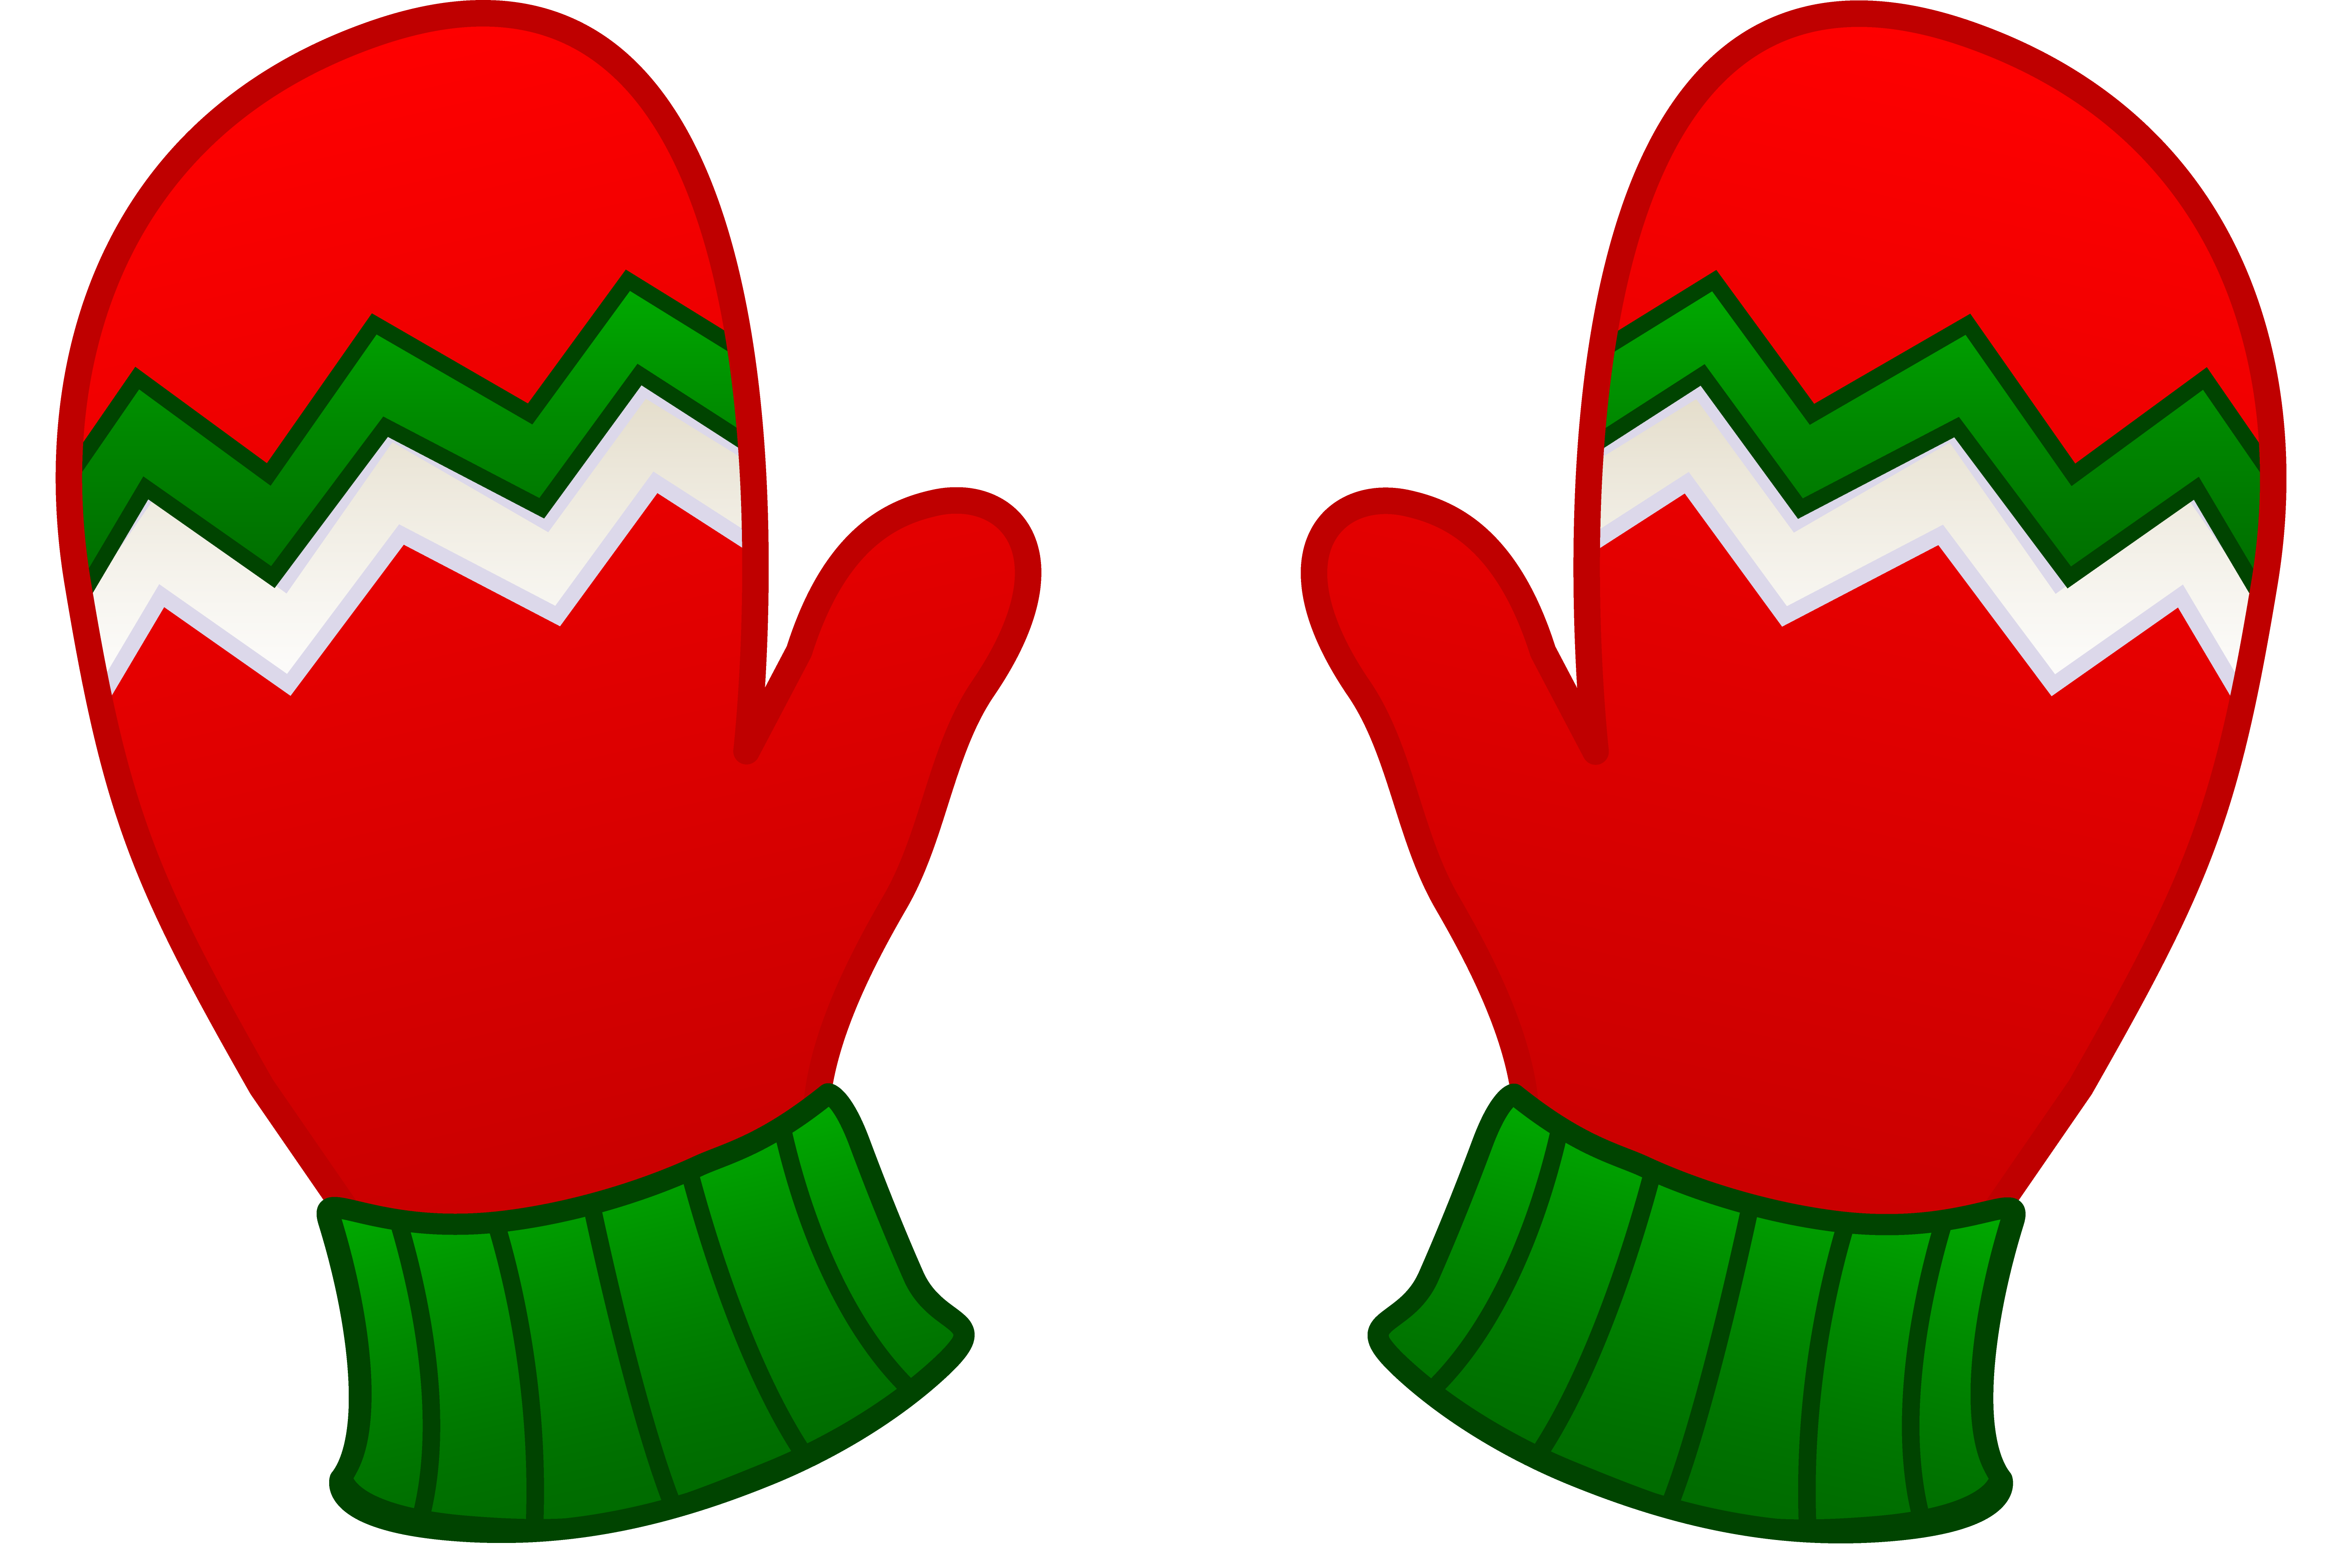 Free mitten cliparts download. Clipart clothes baseball